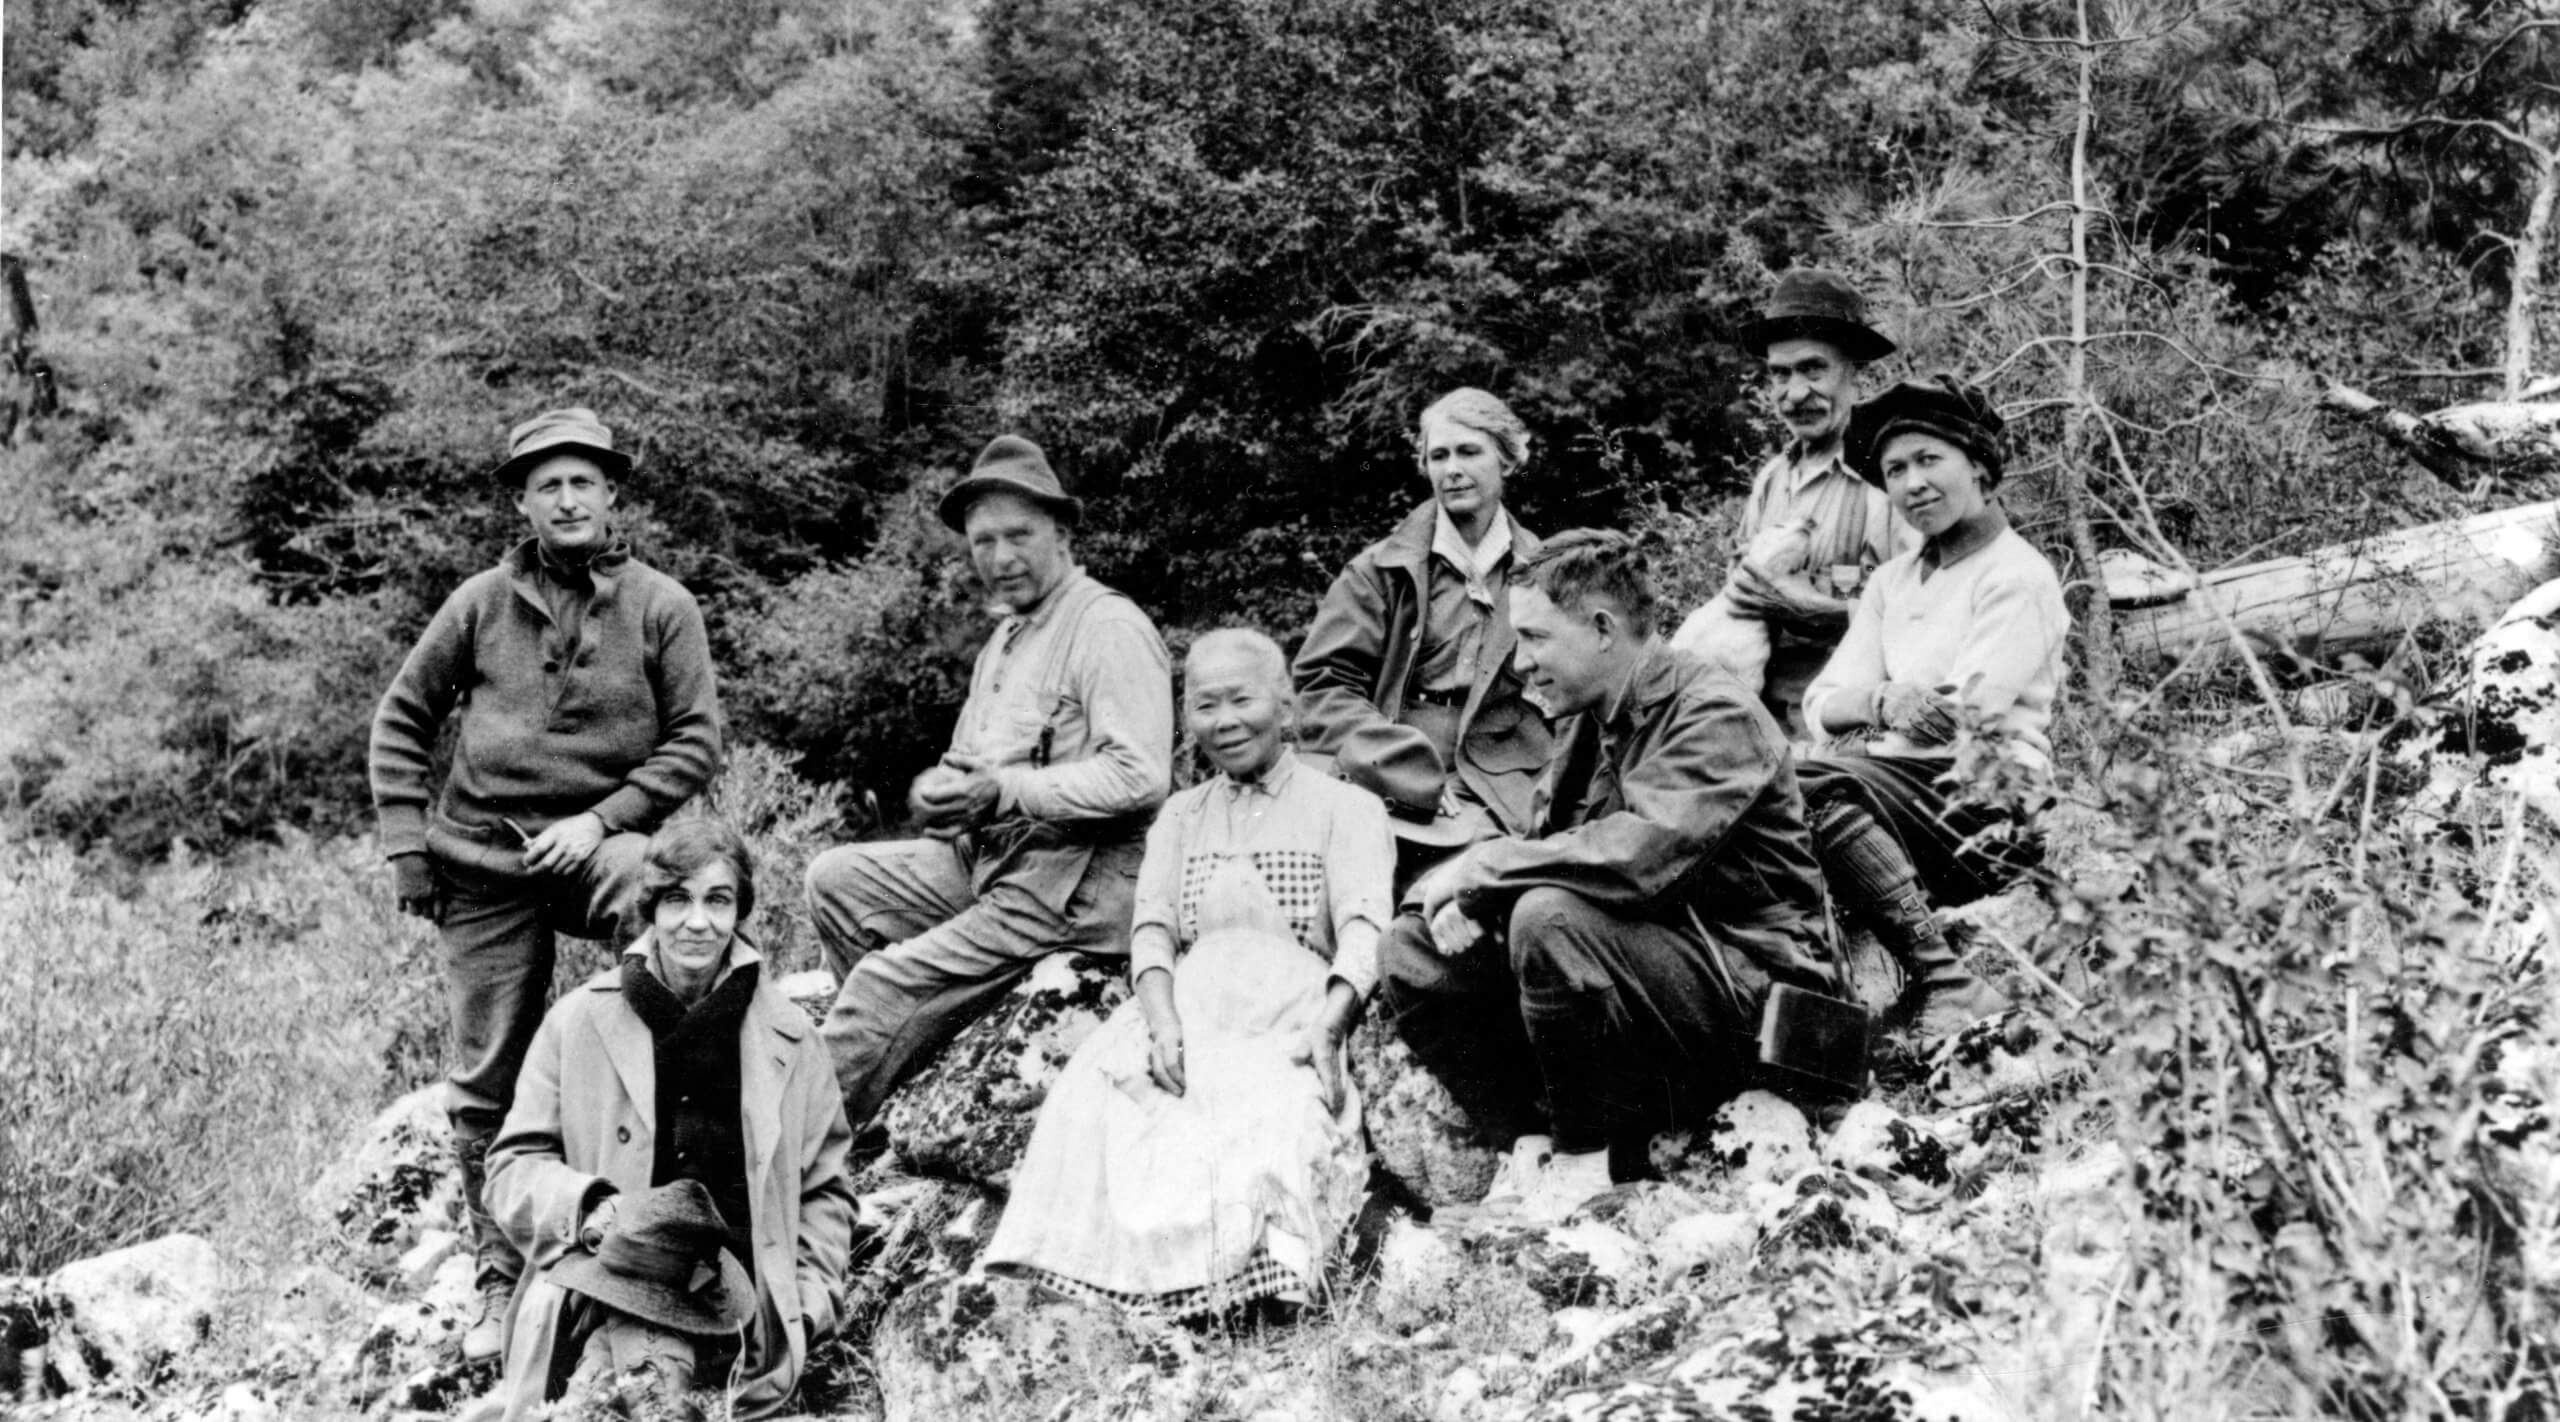 A black-and-white photo of Polly Bemis sitting with a group of seven people on an outing with Captain Guleke.